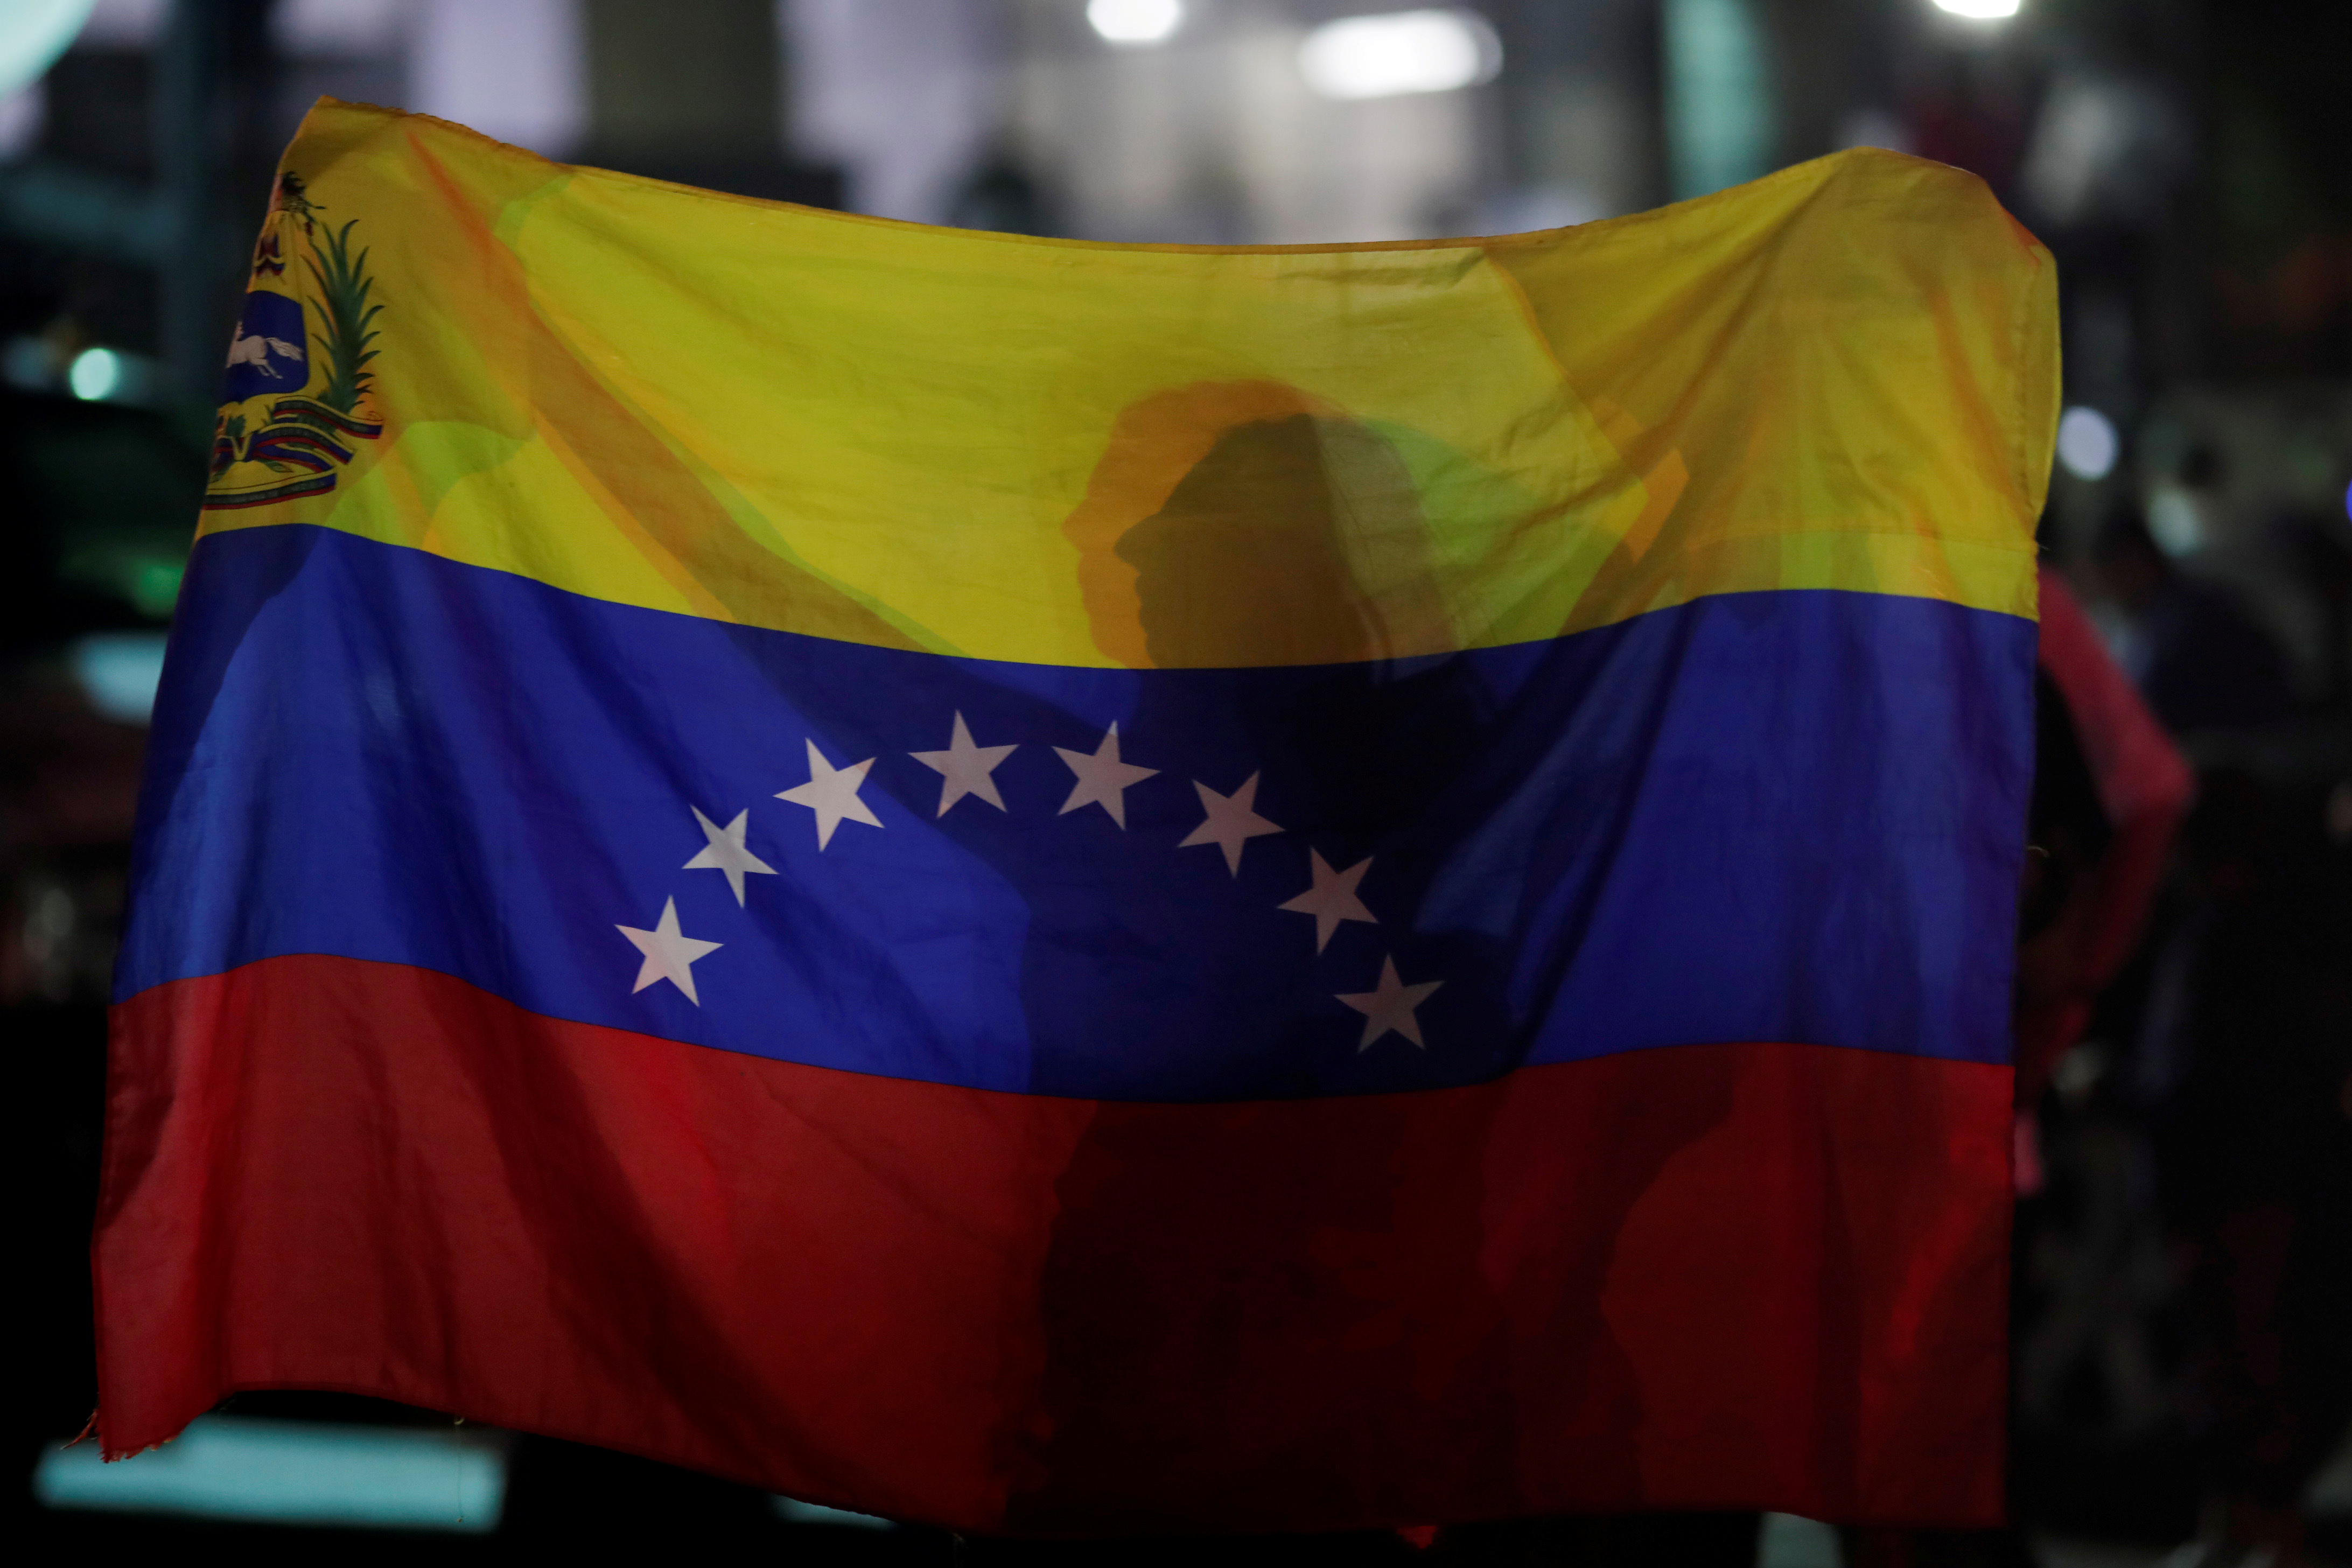 A woman holds a Venezuelan flag while participating in a candlelight vigil held for victims of recent violence in Caracas, Venezuela May 5, 2019. REUTERS/Ueslei Marcelino